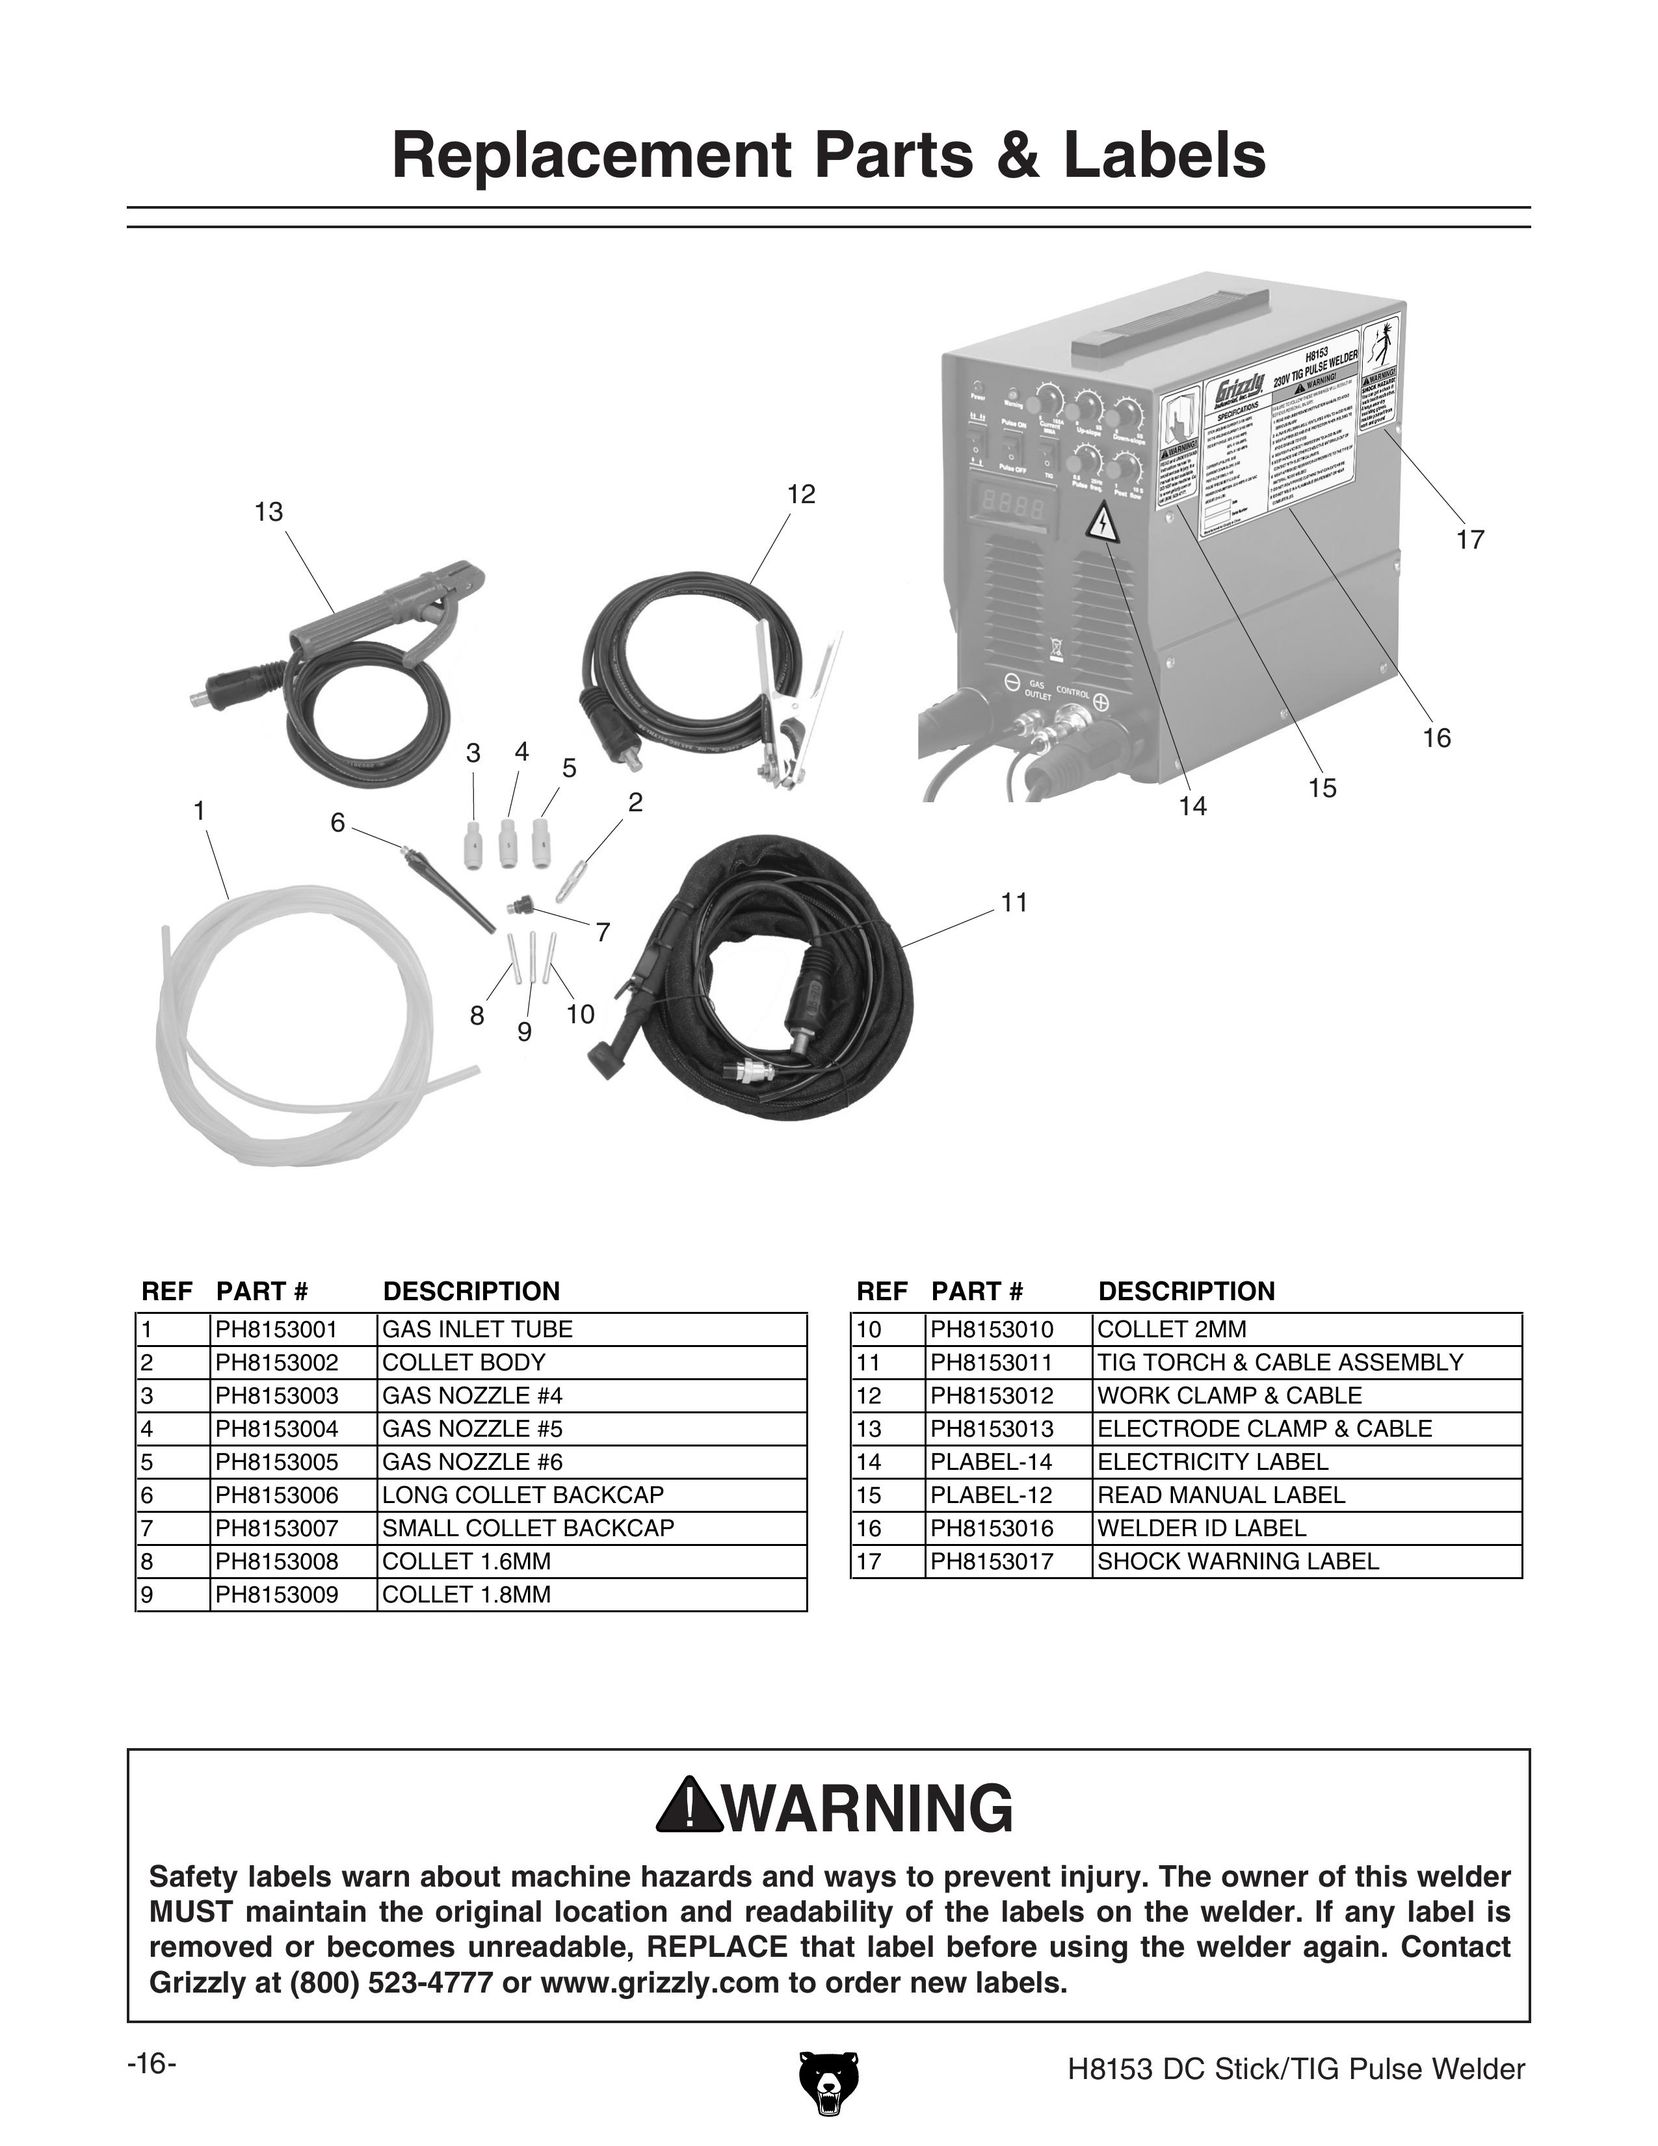 Grizzly H8153 Welder User Manual